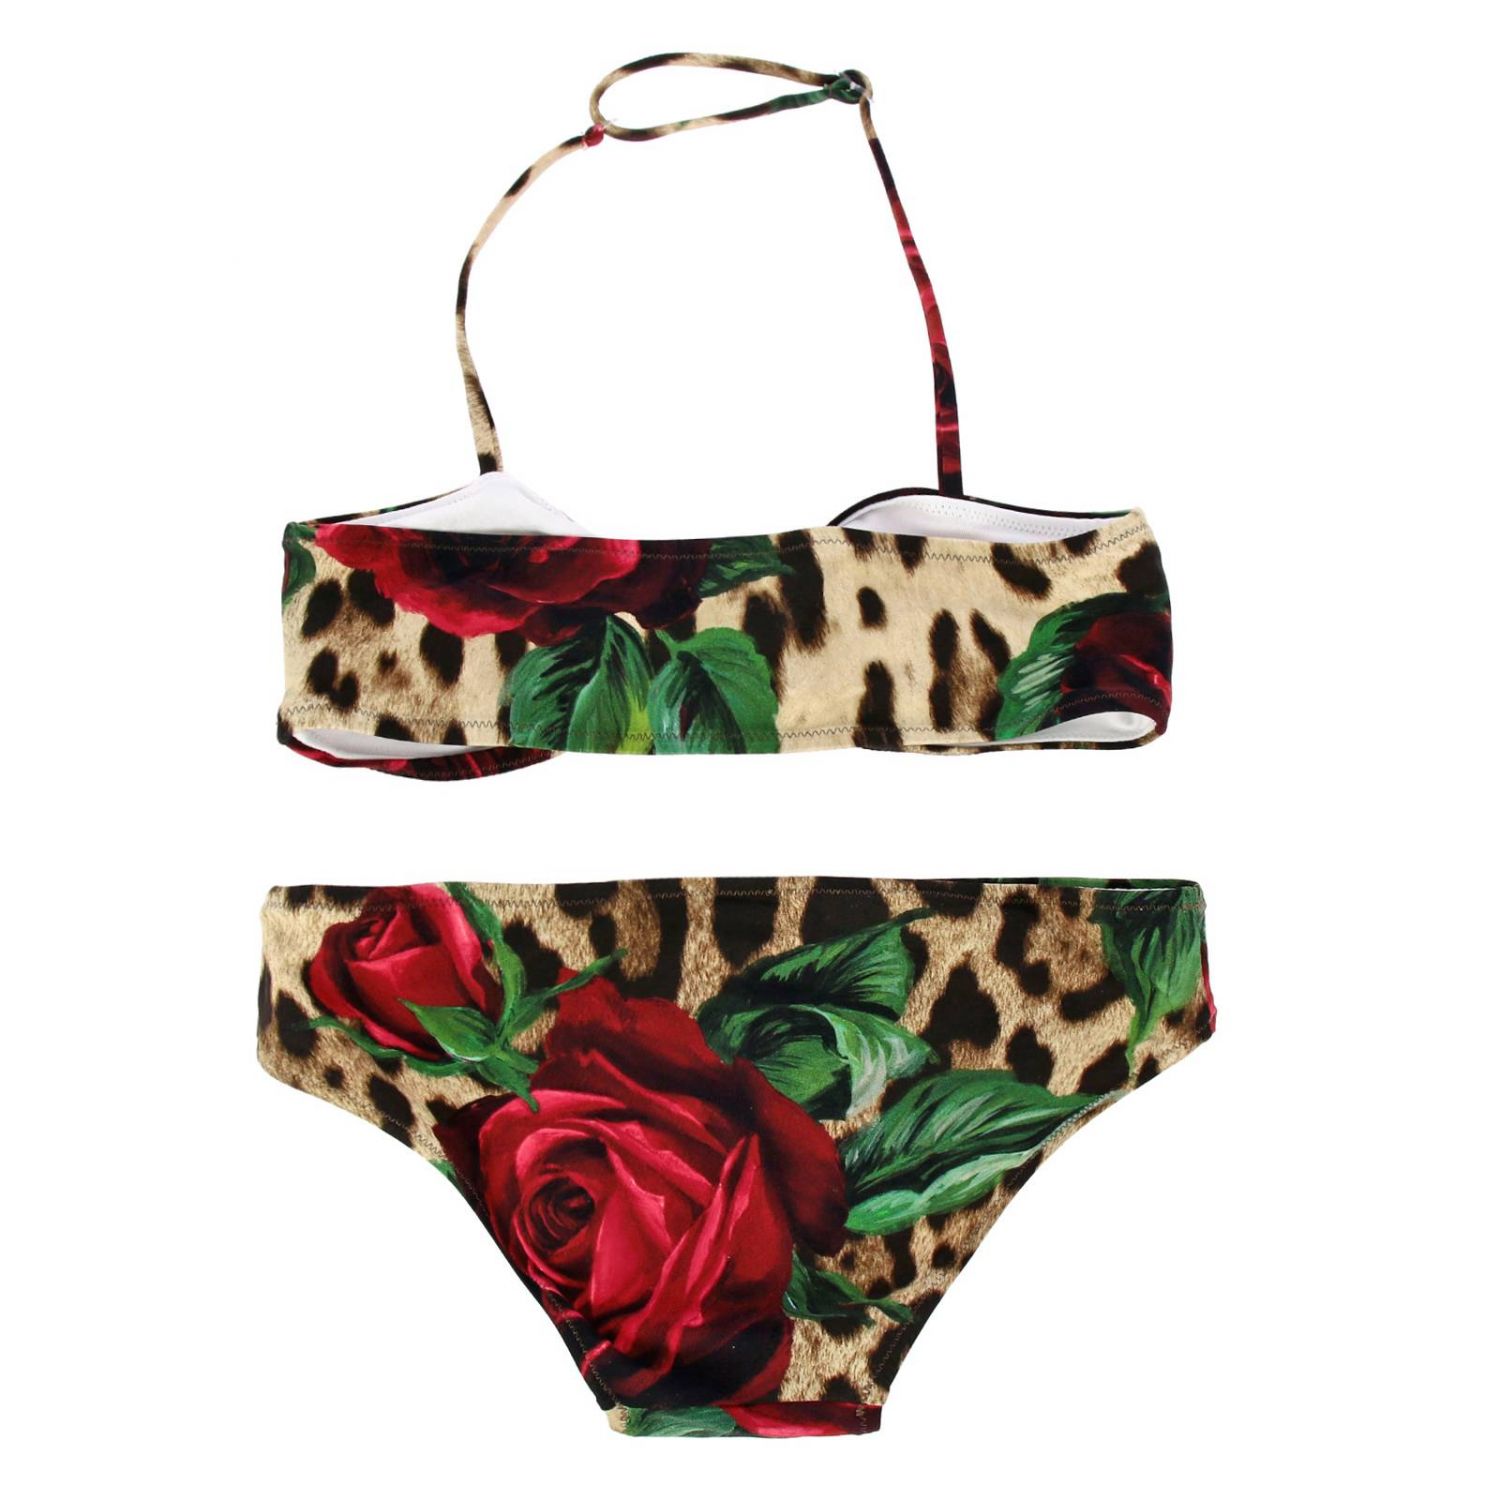 Dolce & Gabbana Outlet: Swimsuit kids - Multicolor | Swimsuit Dolce ...